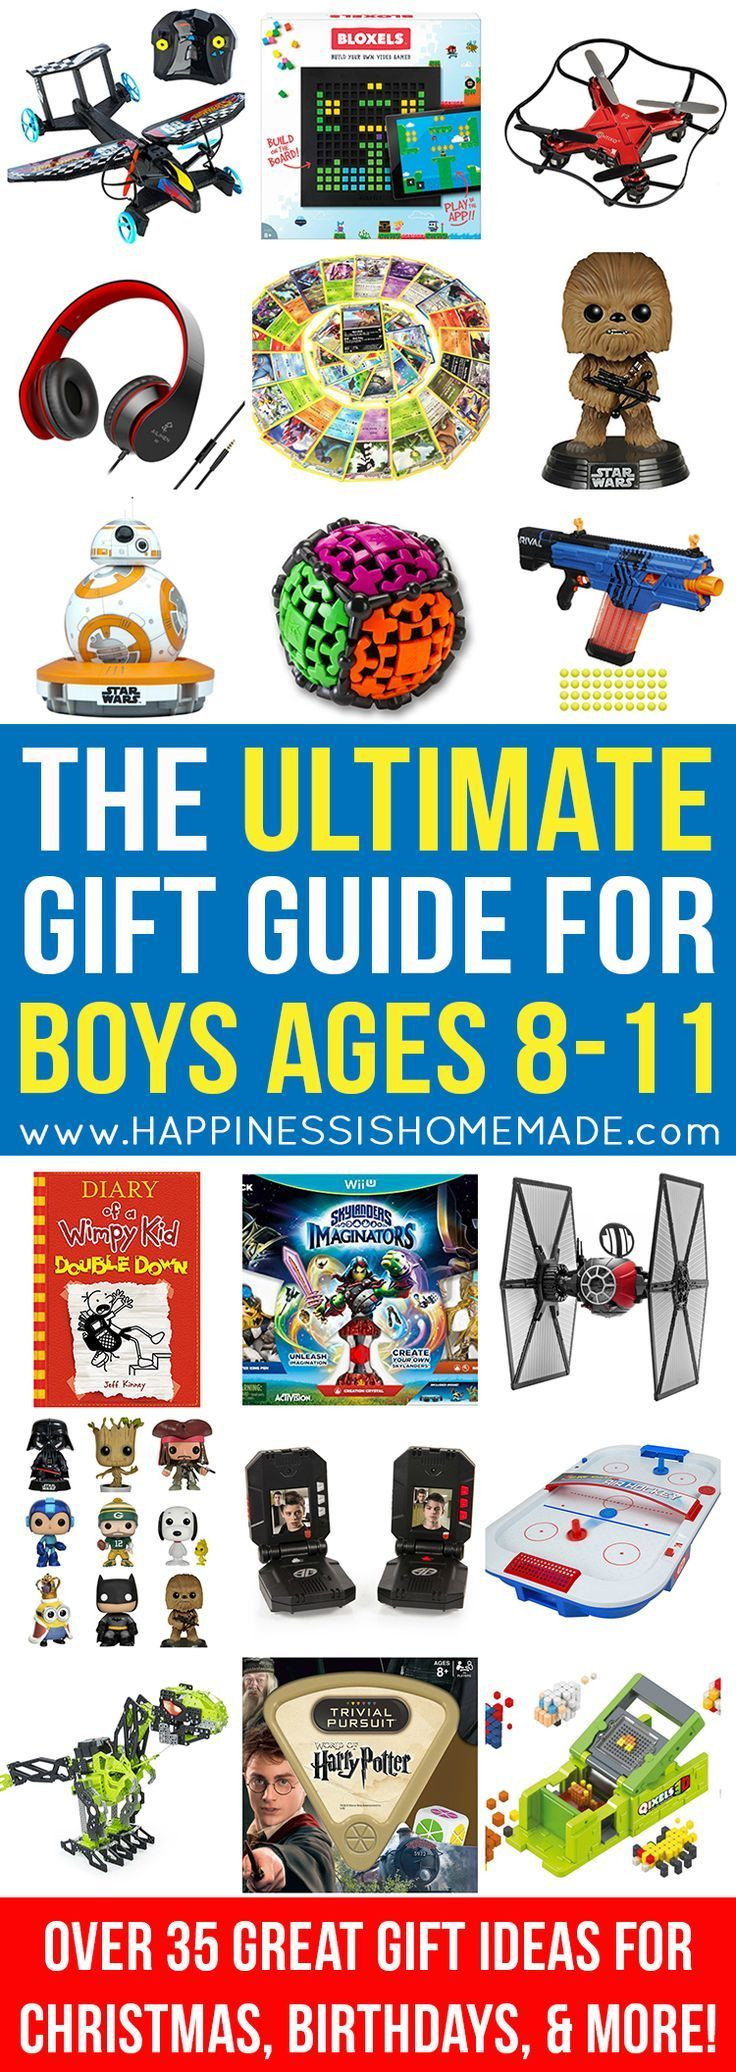 Girls Gift Ideas Age 8
 120 best images about Best Toys for 8 Year Old Girls on